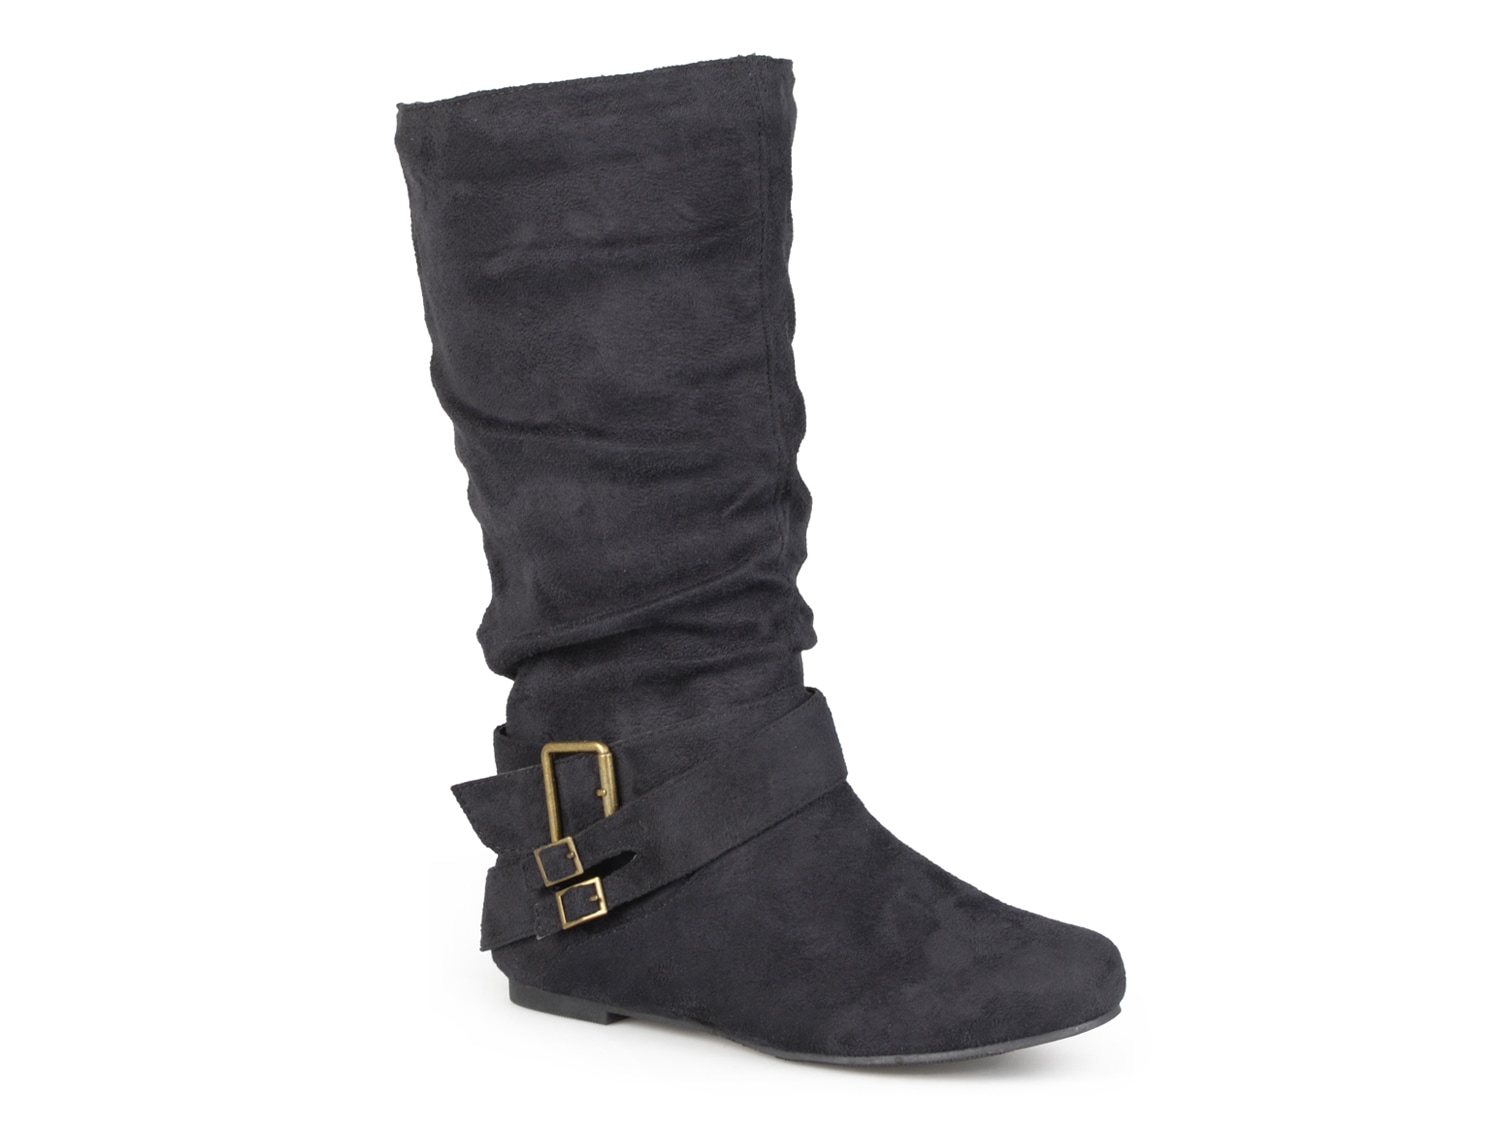 Journee Collection Shelley-6 Boot - Free Shipping | DSW